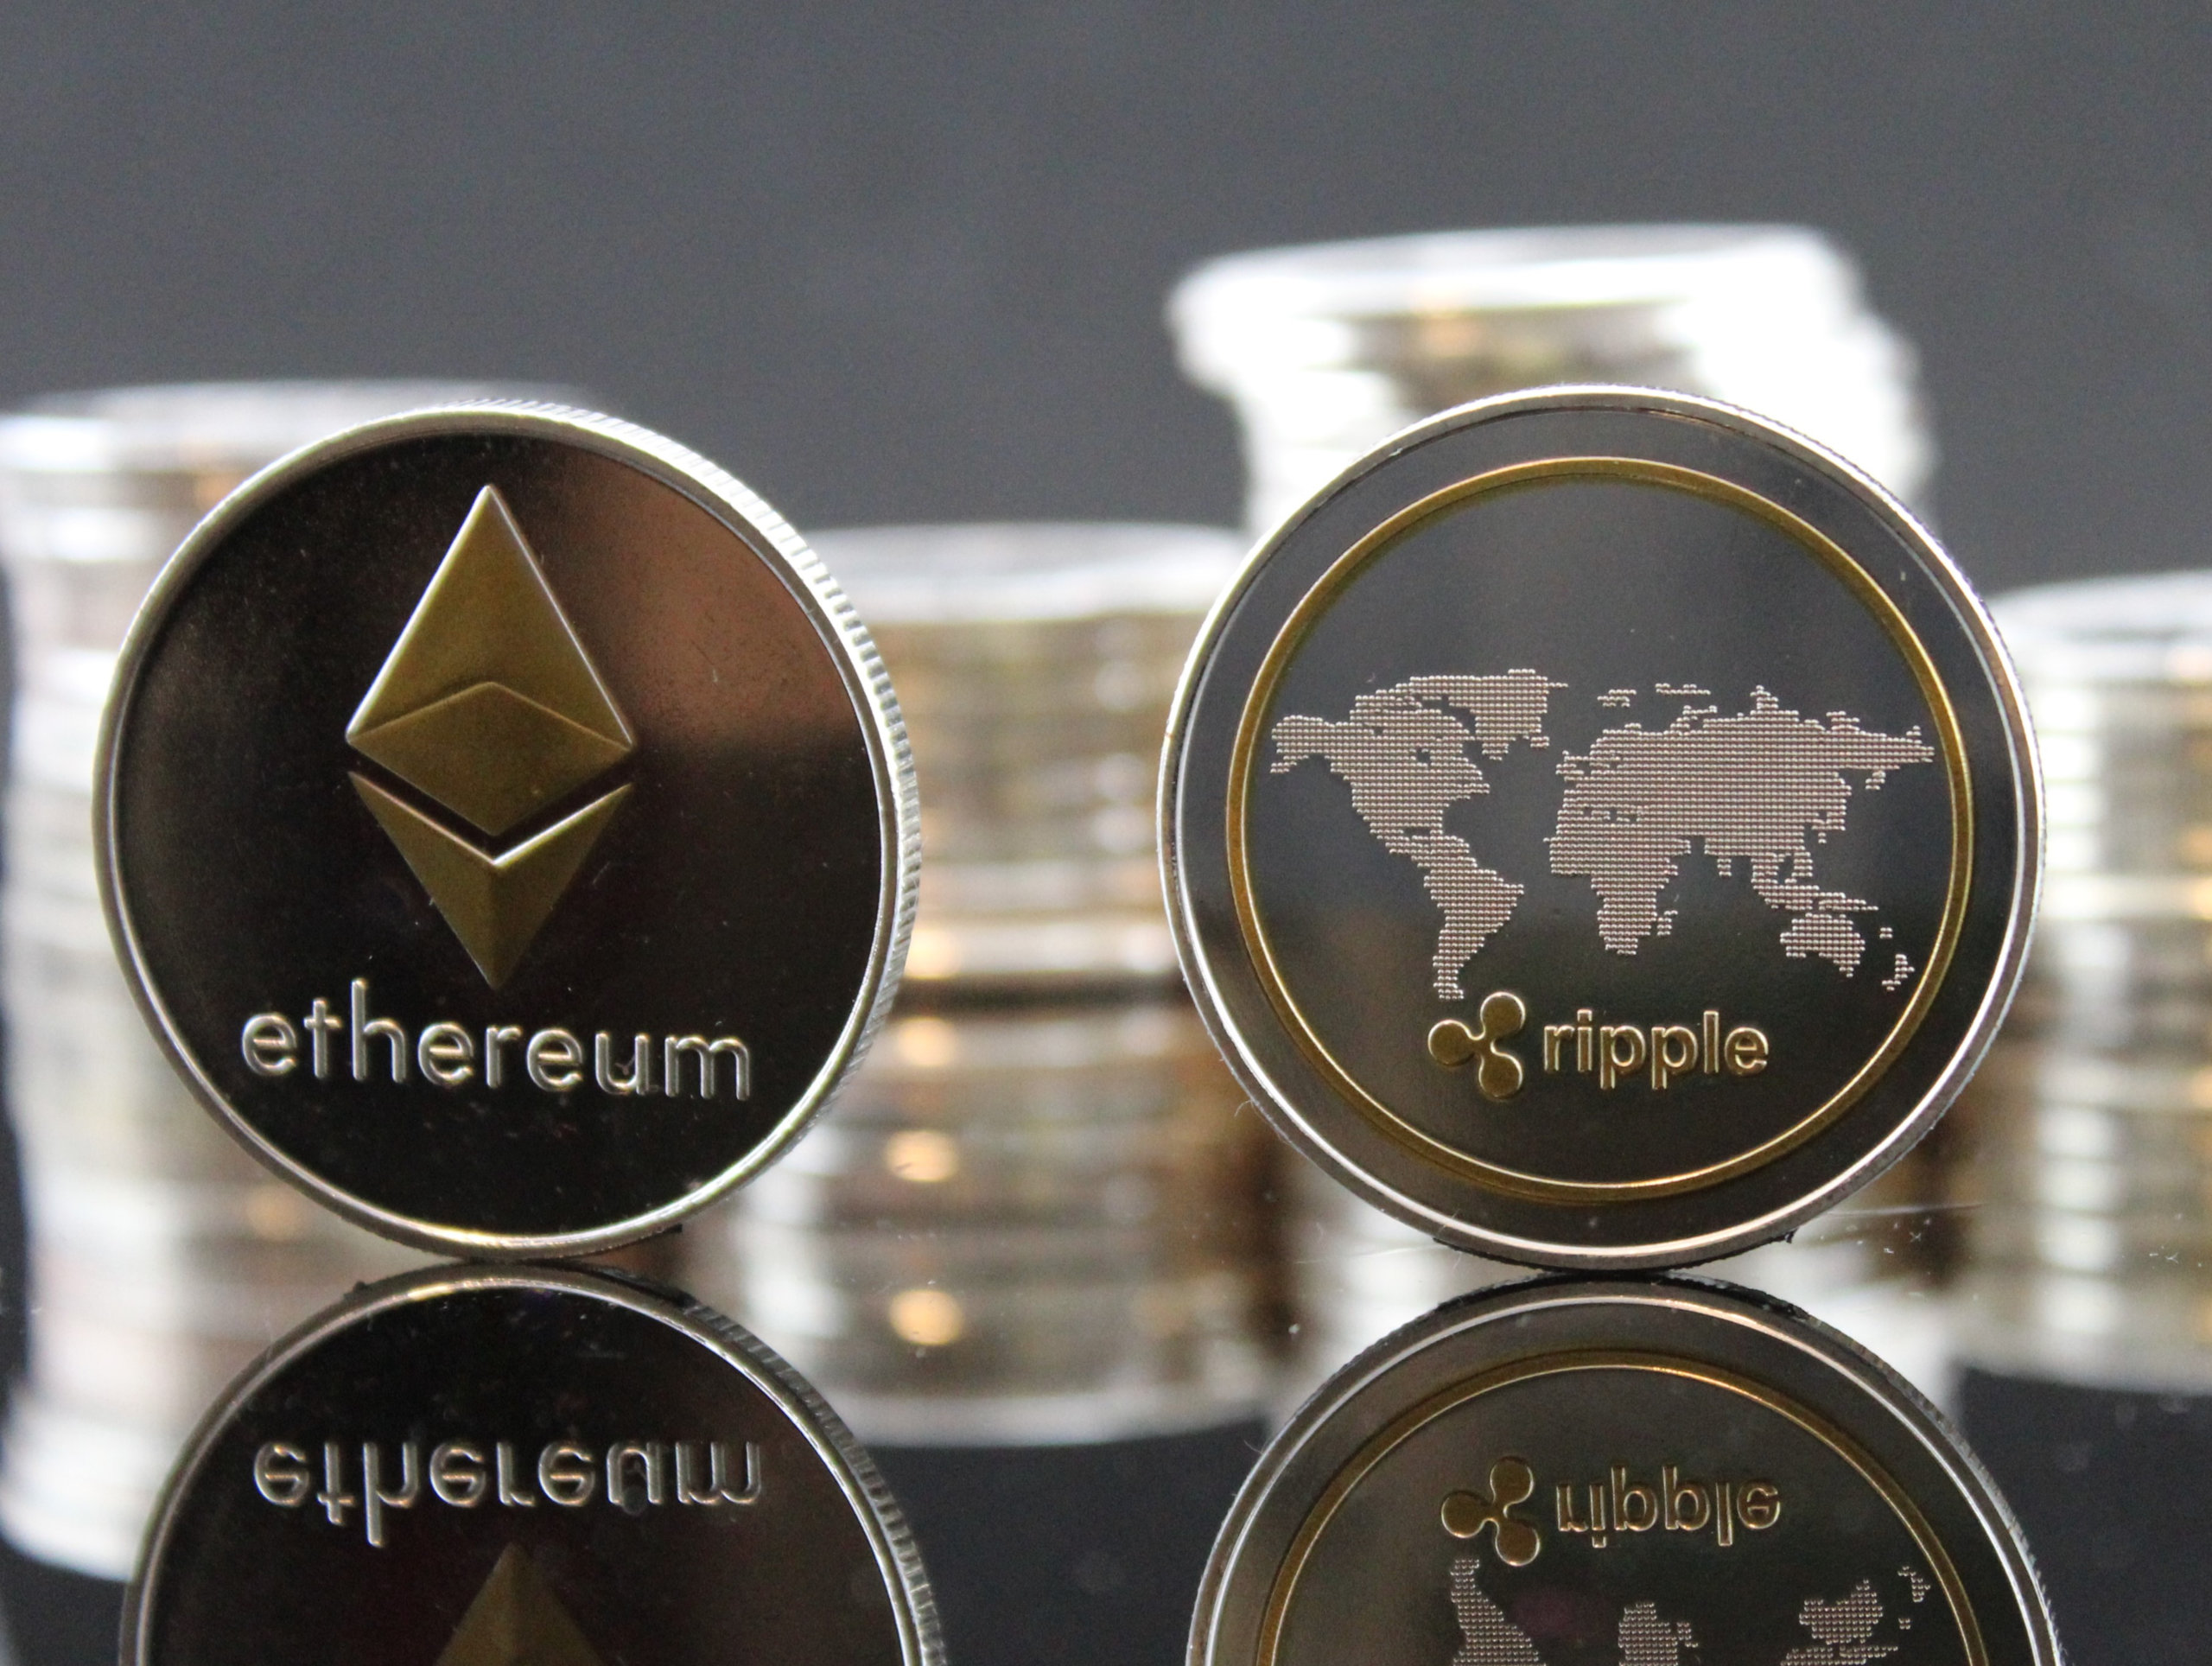  ceo xrp ripple ether surpass helped sec 